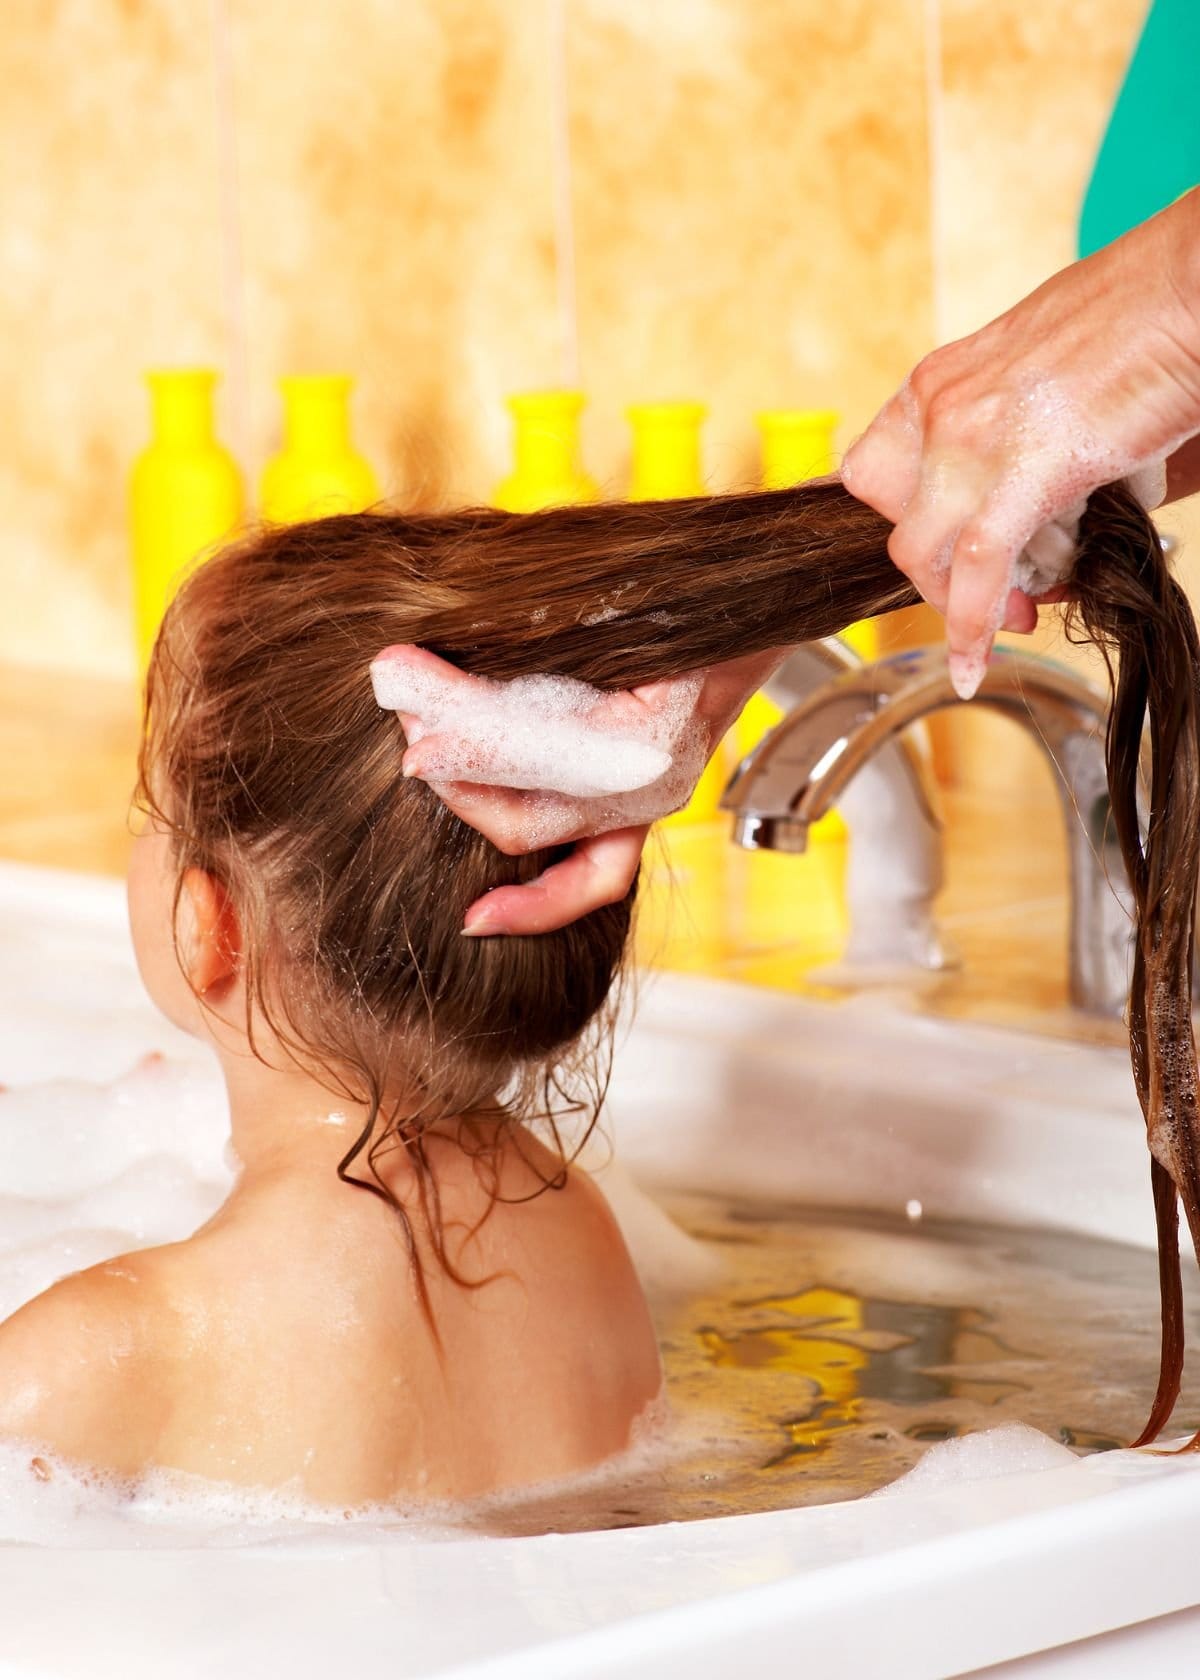 What Shampoo for Kids Will Help Dry Scalp